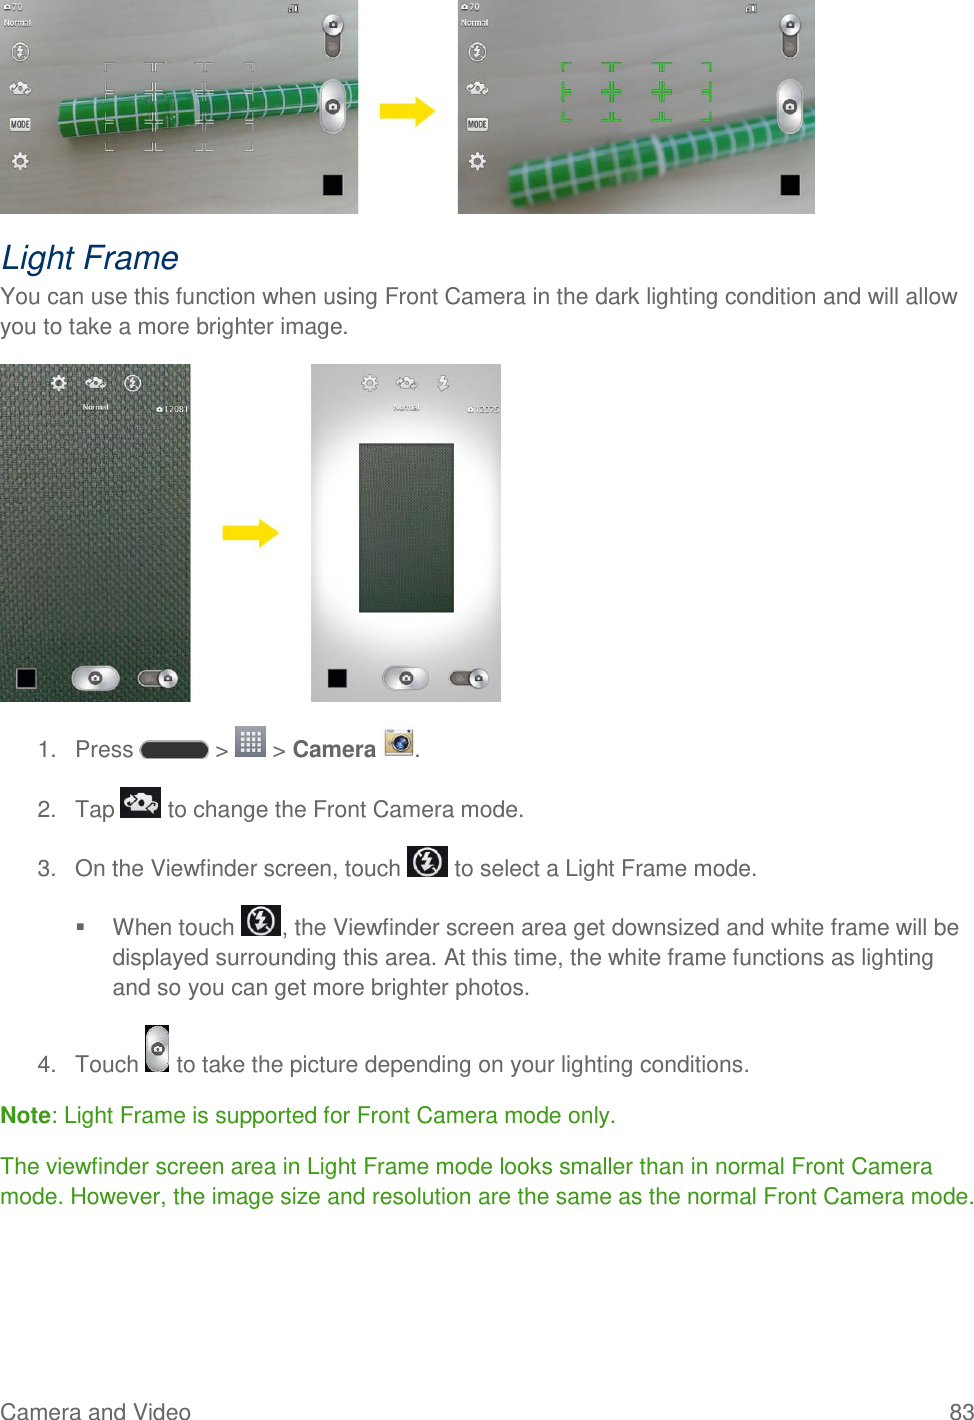 Camera and Video  83  Light Frame You can use this function when using Front Camera in the dark lighting condition and will allow you to take a more brighter image.  1.  Press   &gt;   &gt; Camera  . 2.  Tap   to change the Front Camera mode. 3.  On the Viewfinder screen, touch   to select a Light Frame mode.   When touch  , the Viewfinder screen area get downsized and white frame will be displayed surrounding this area. At this time, the white frame functions as lighting and so you can get more brighter photos. 4.  Touch   to take the picture depending on your lighting conditions. Note: Light Frame is supported for Front Camera mode only.  The viewfinder screen area in Light Frame mode looks smaller than in normal Front Camera mode. However, the image size and resolution are the same as the normal Front Camera mode. 